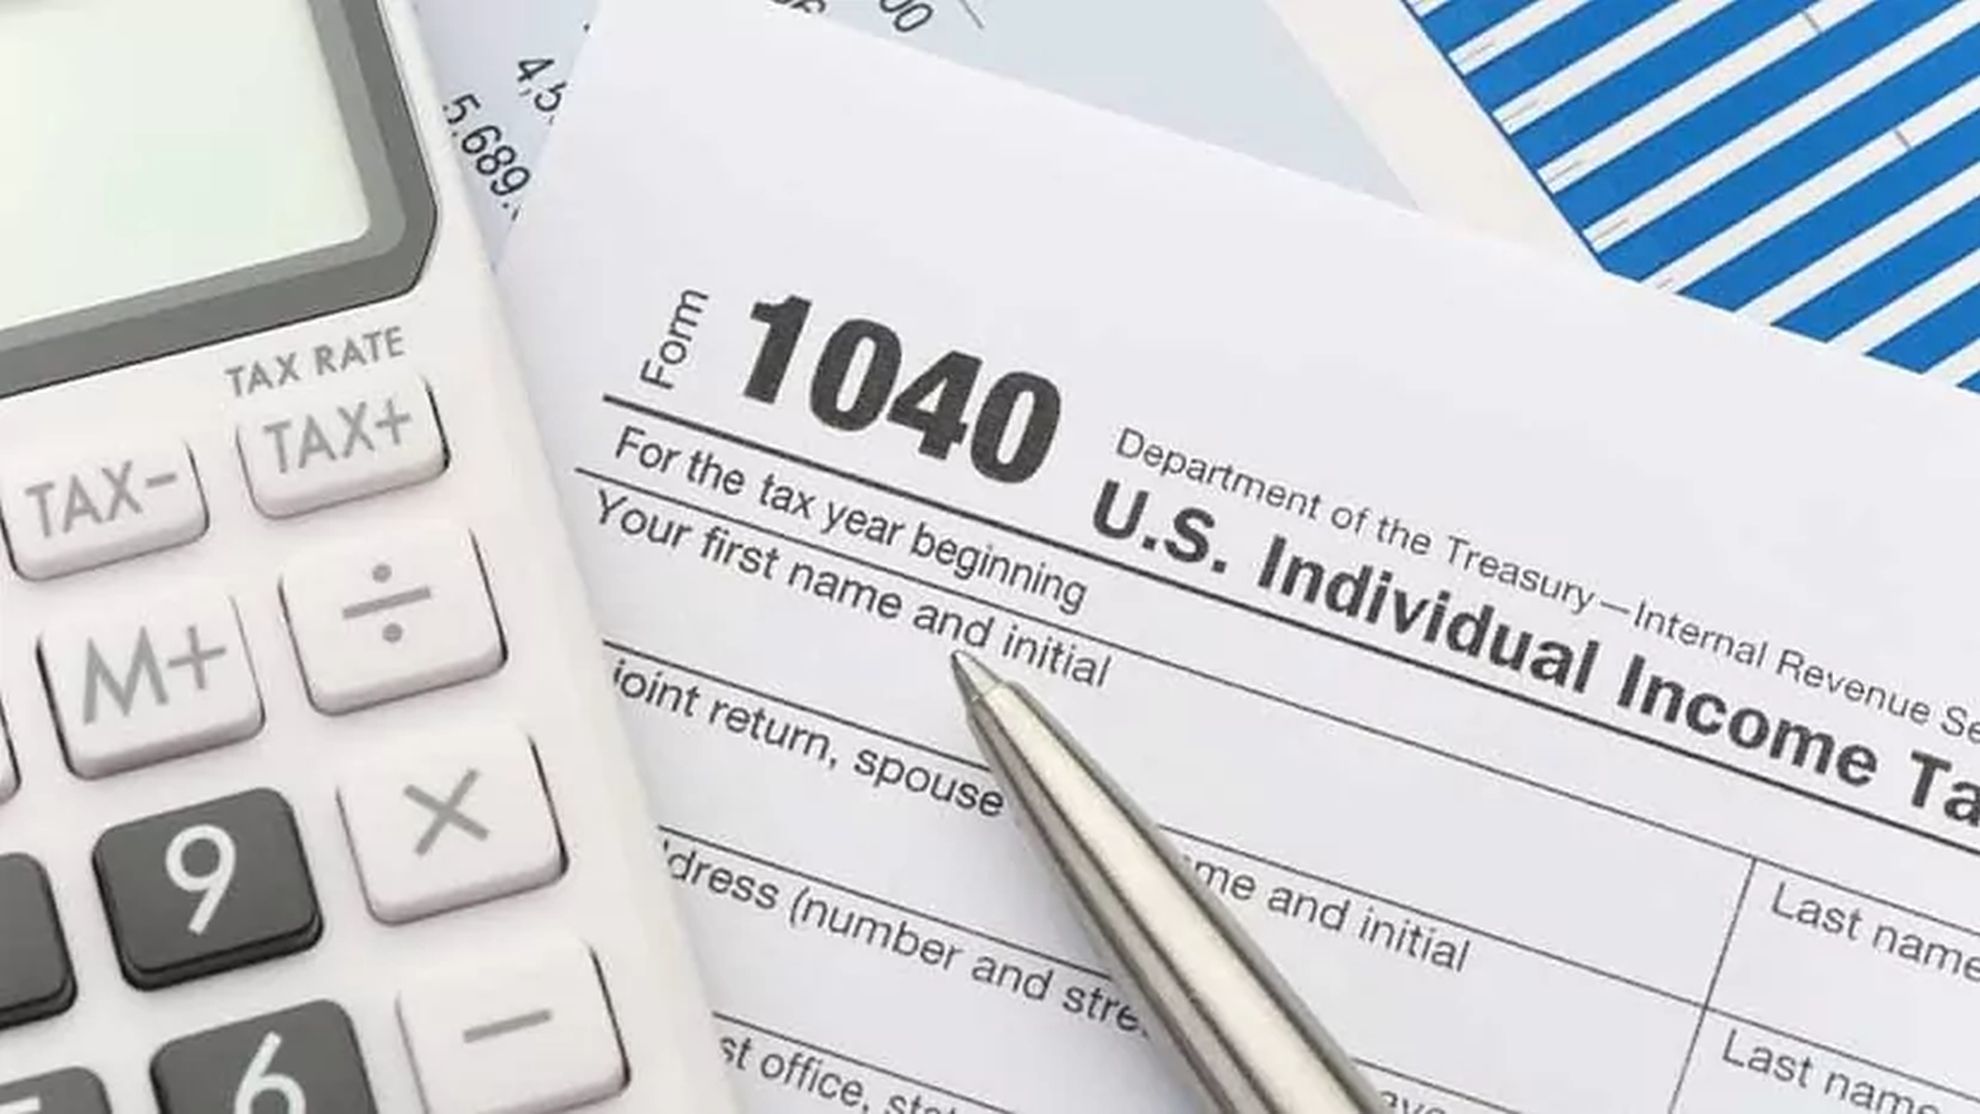 Irs Schedule 1 2022 Irs Tax Forms: What Is Form 1040, Individual Income Tax Return? | Marca